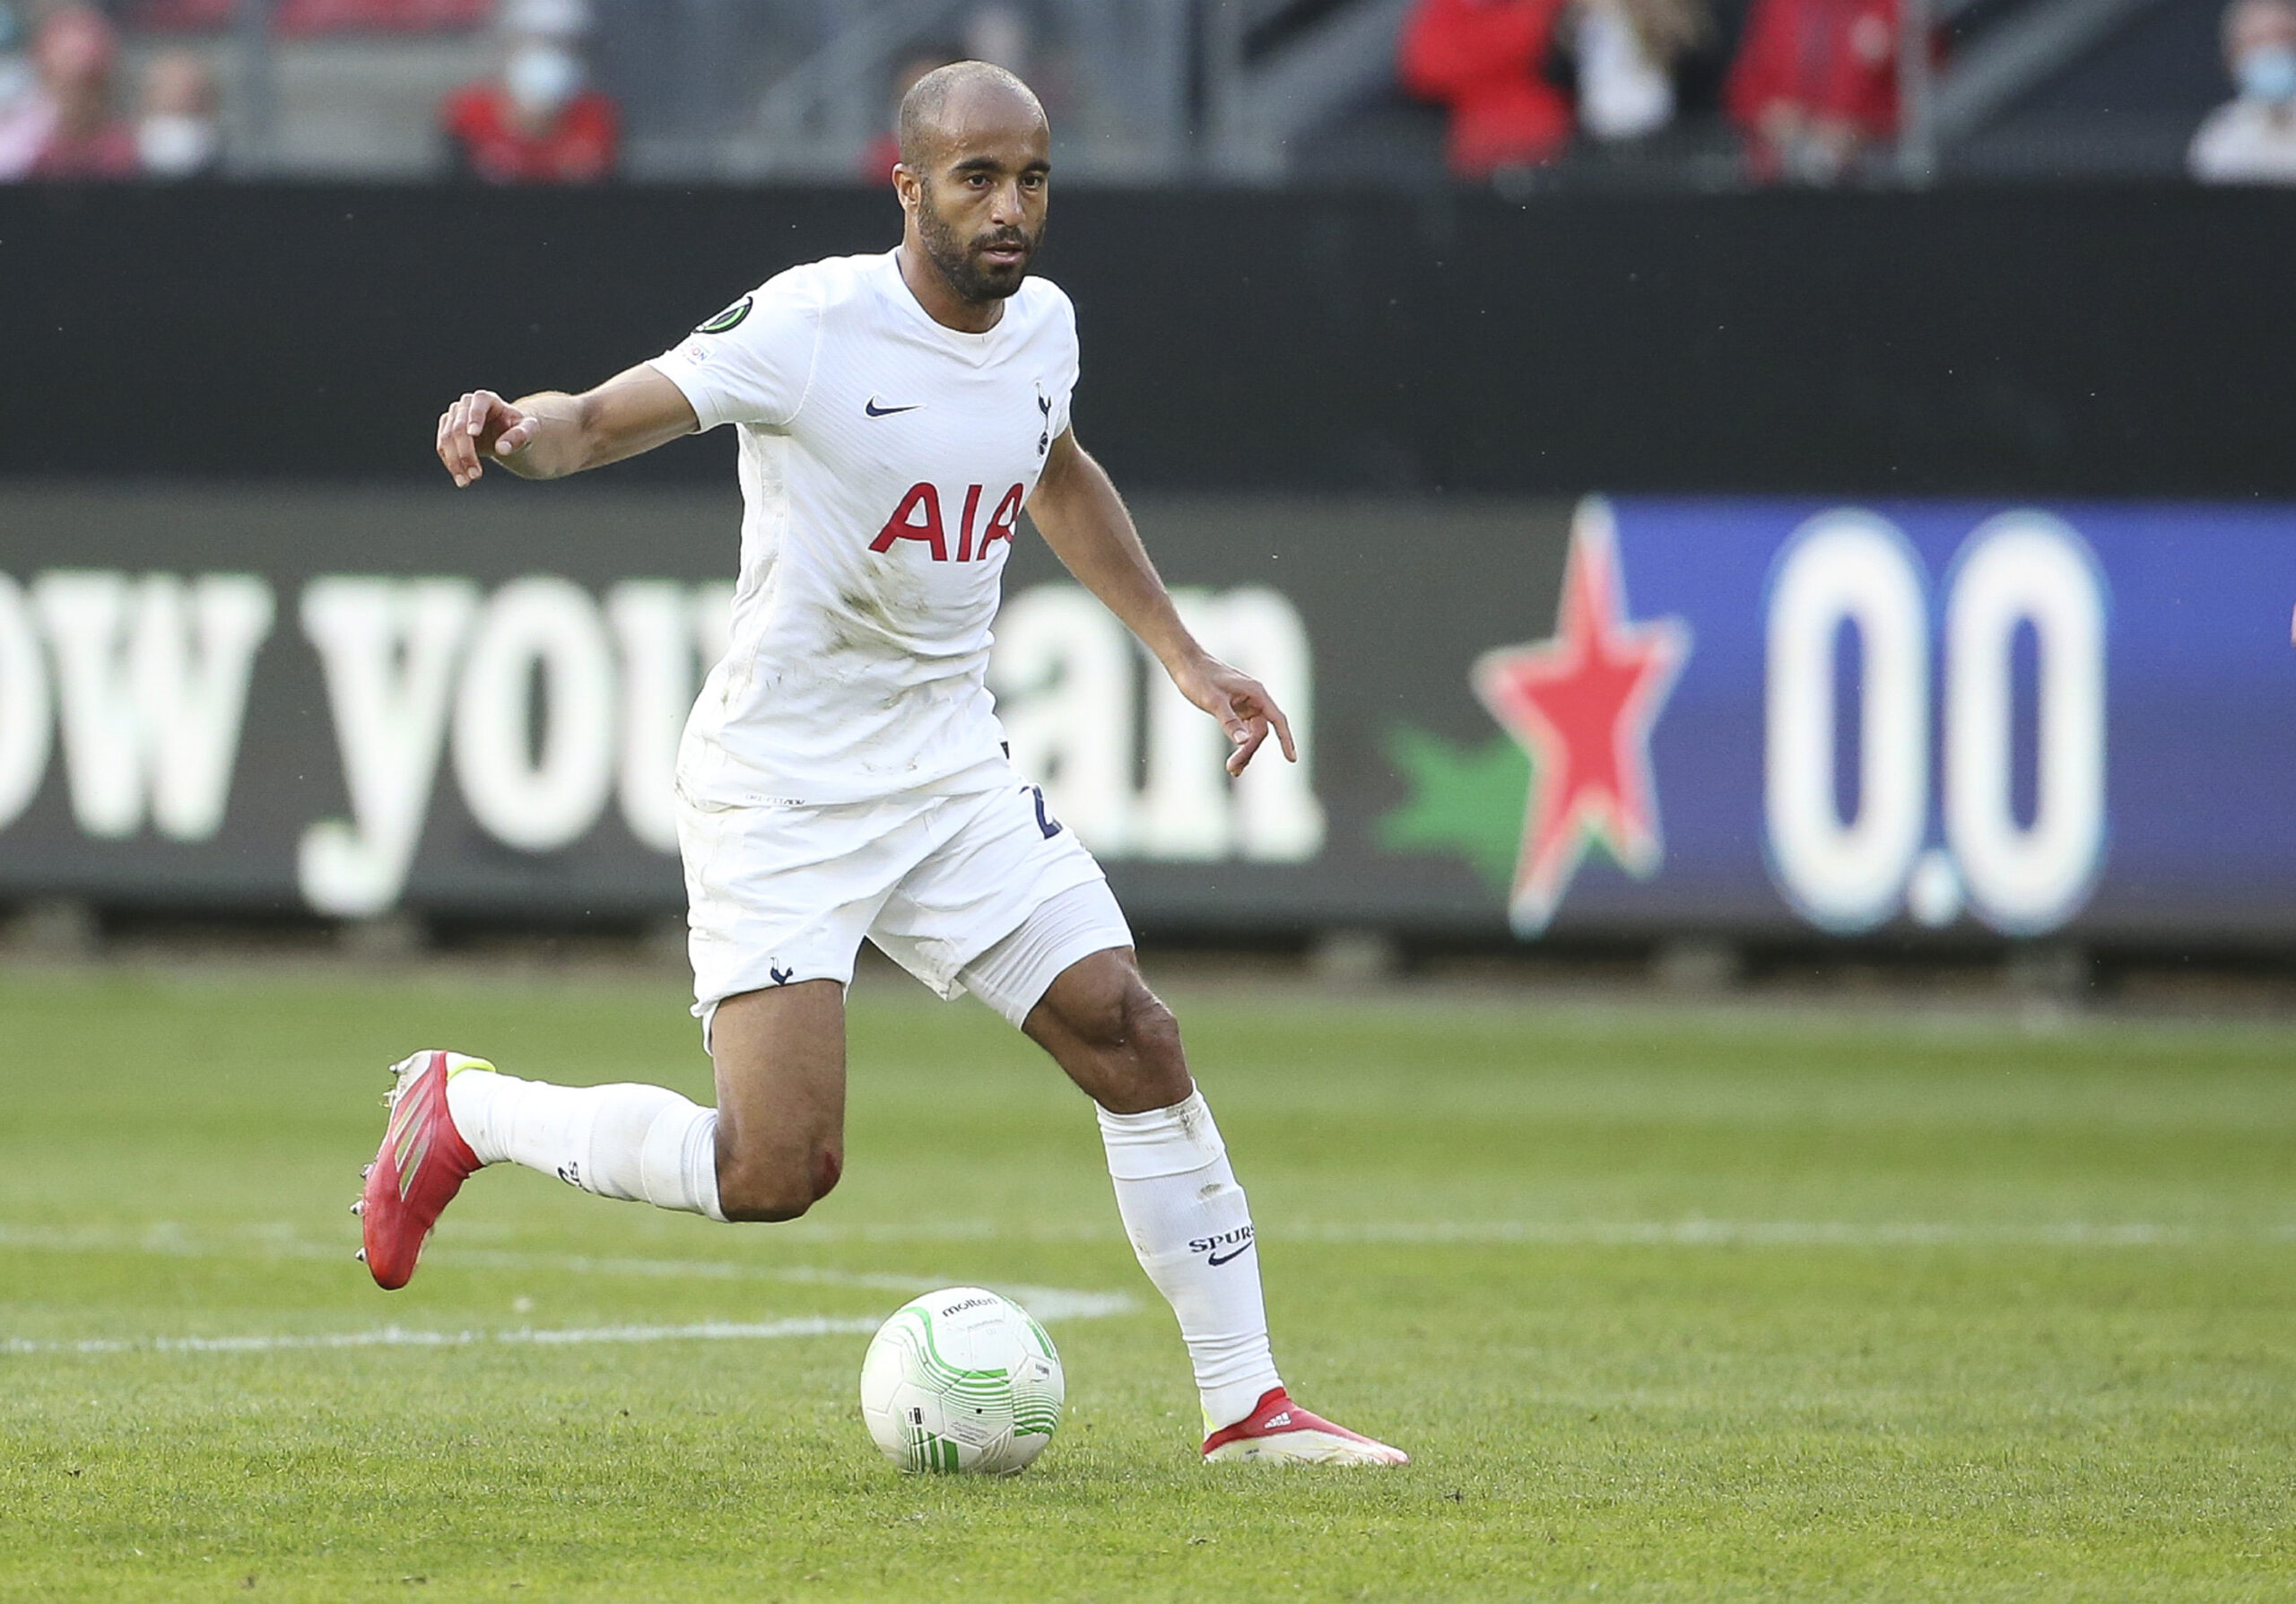 I want to return to Sao Paulo after my contract at Tottenham – Lucas Moura